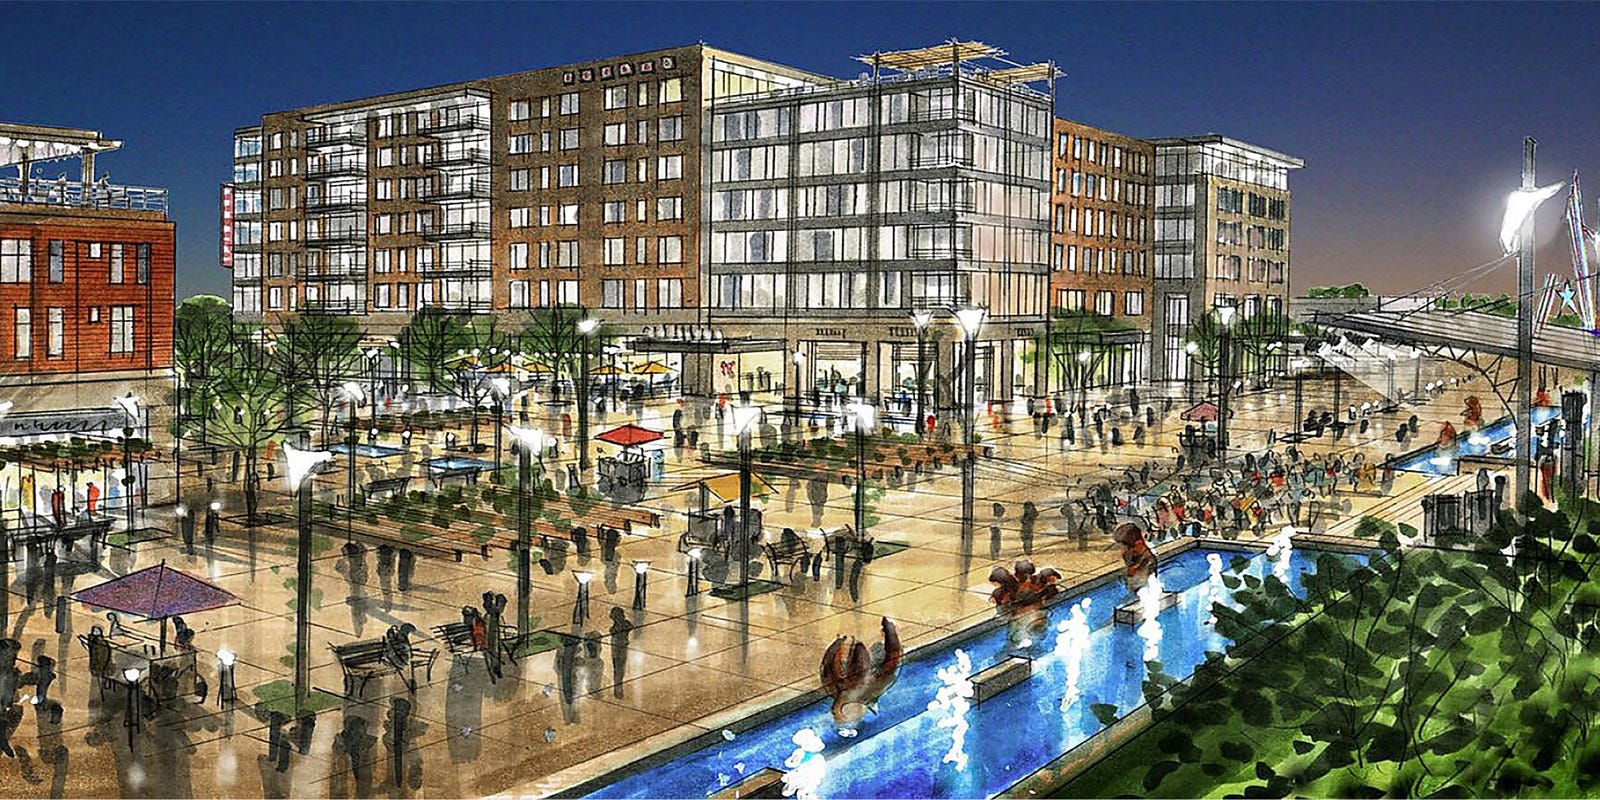 Abilene City Council approves development agreement for downtown hotel